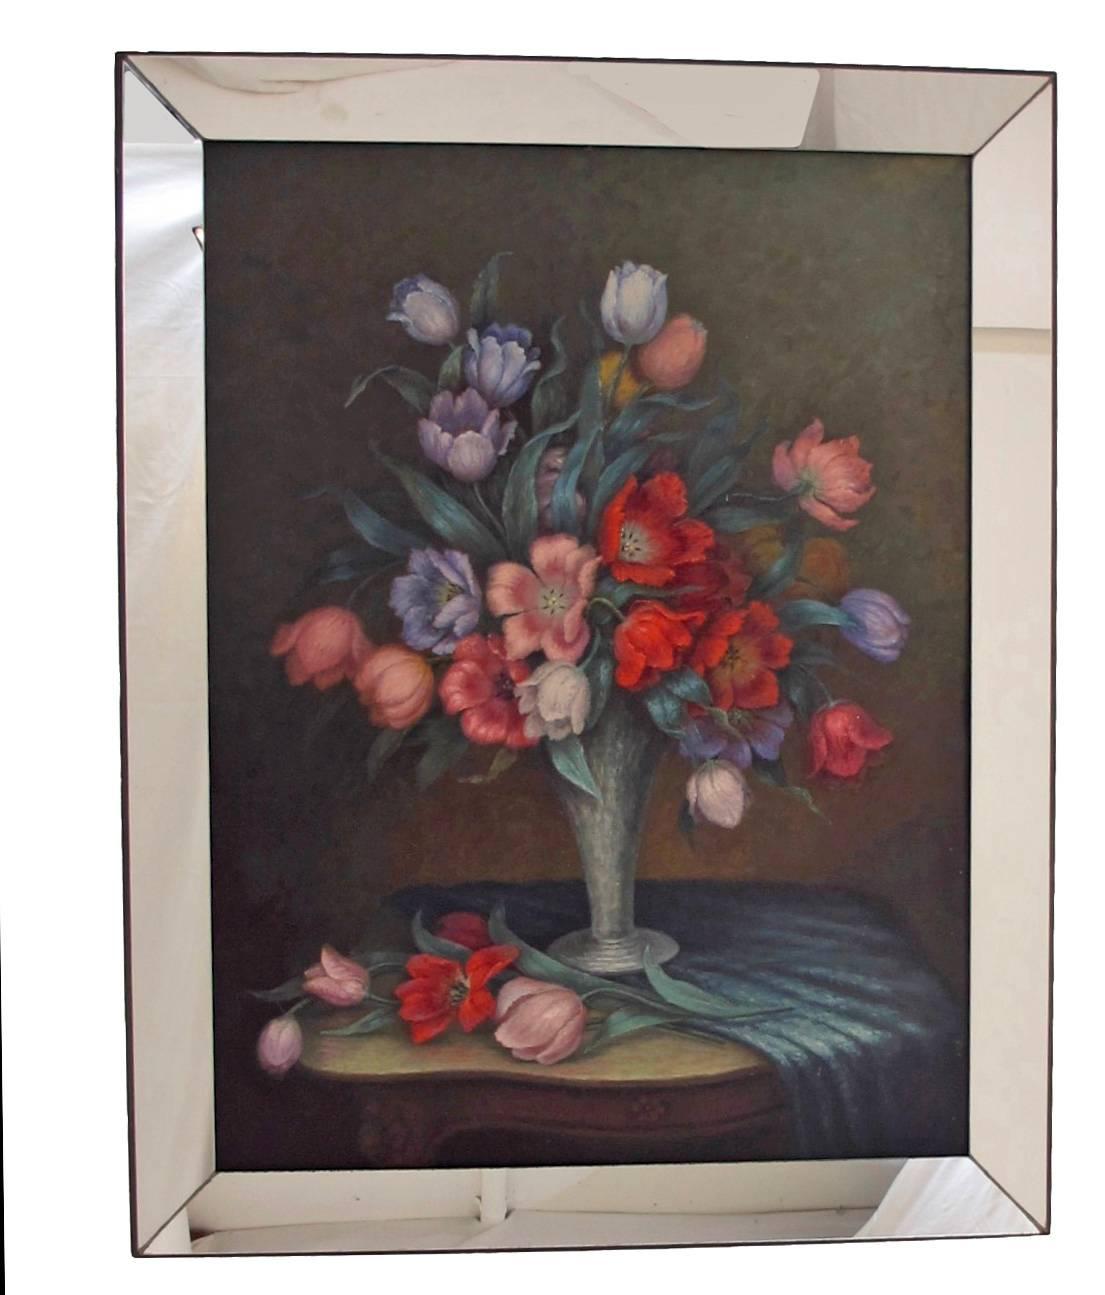 A finely painted large-scale colorful floral still life in mirrored frame. Oil on board, unsigned, American, circa 1940.